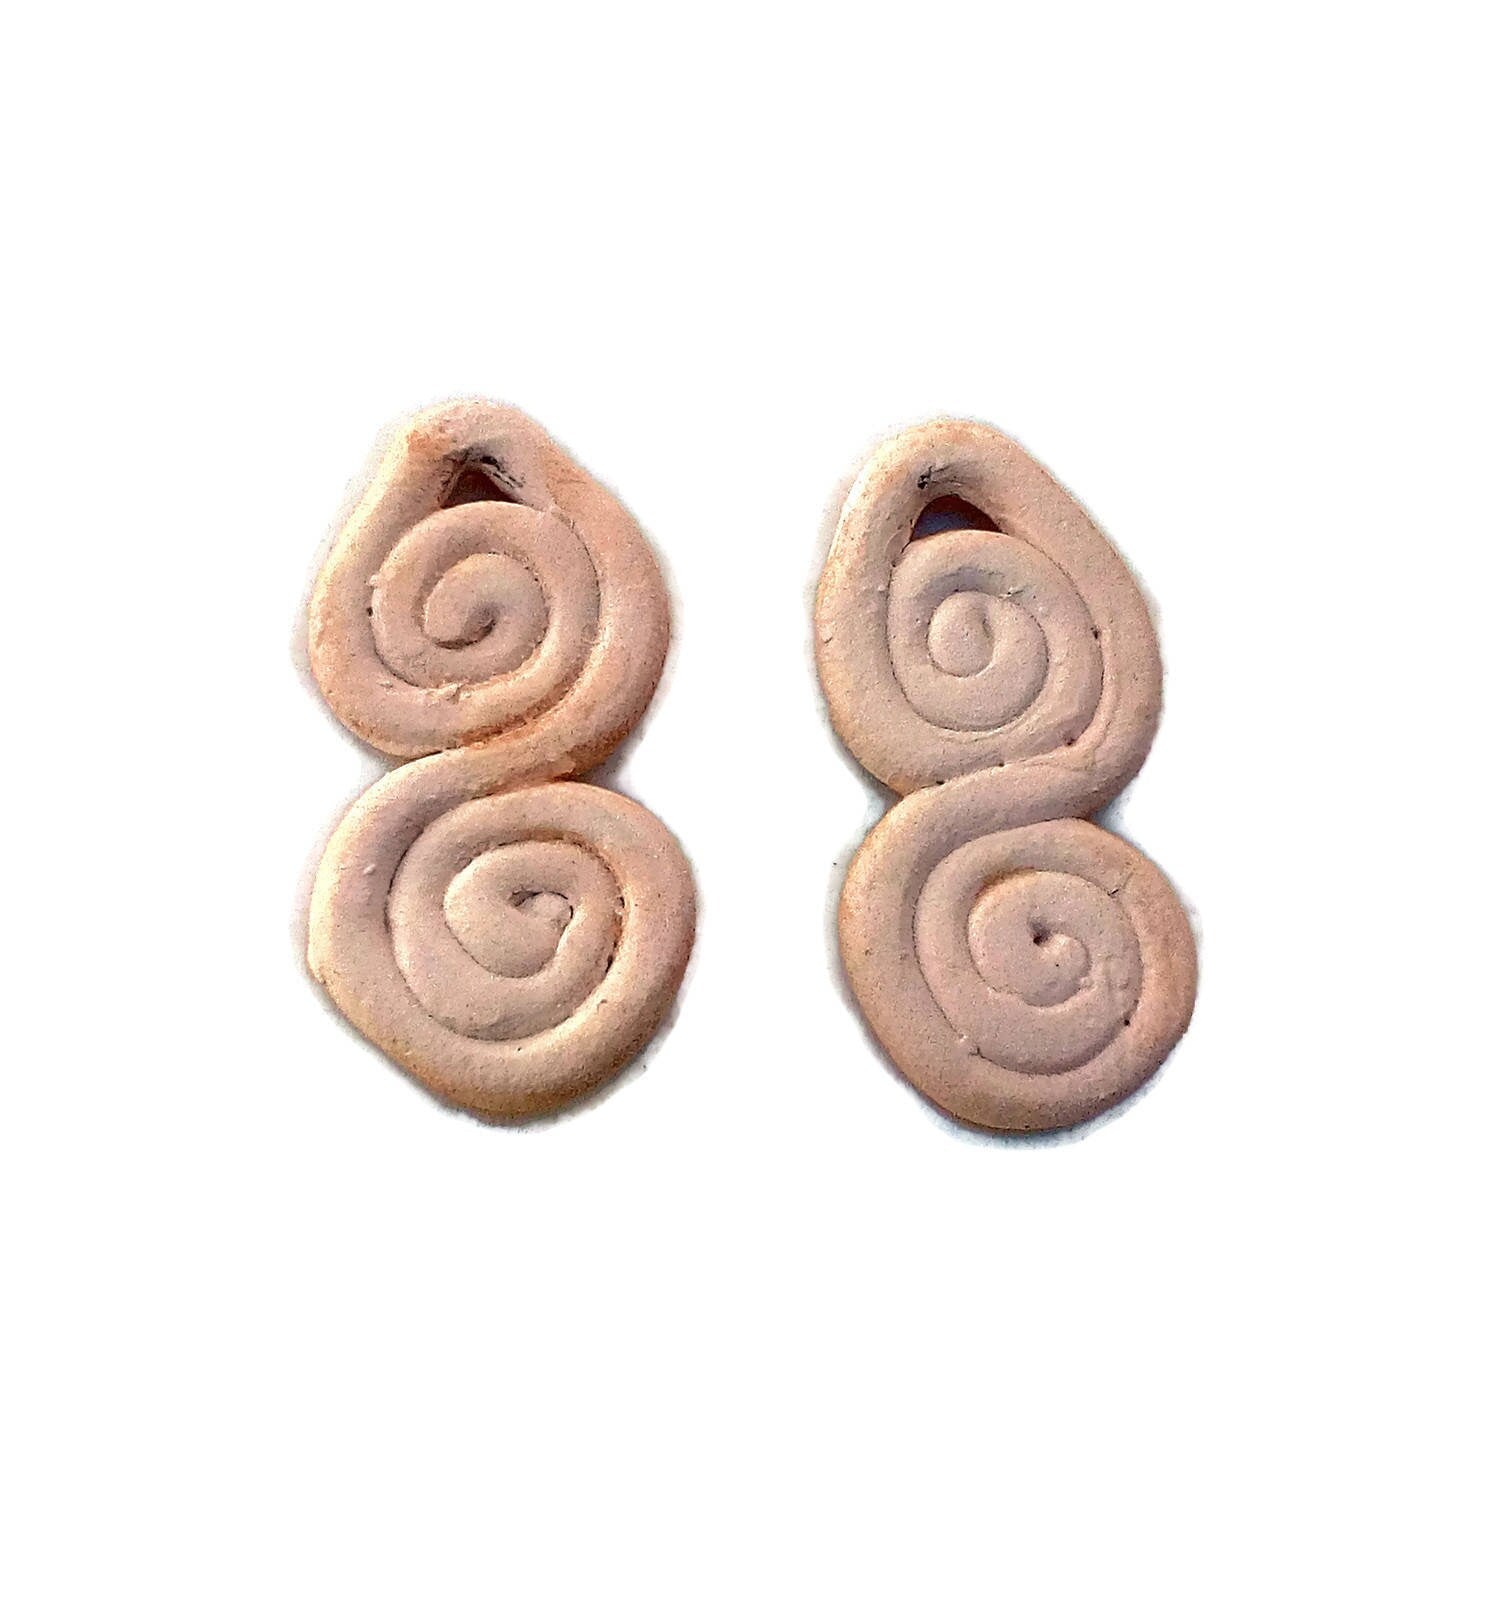 1Pc 40mm Extra Large Handmade Ceramic Necklace Pendant For Jewelry Making, Unique Artisan Clay Charms Infinity Design For Women - Ceramica Ana Rafael